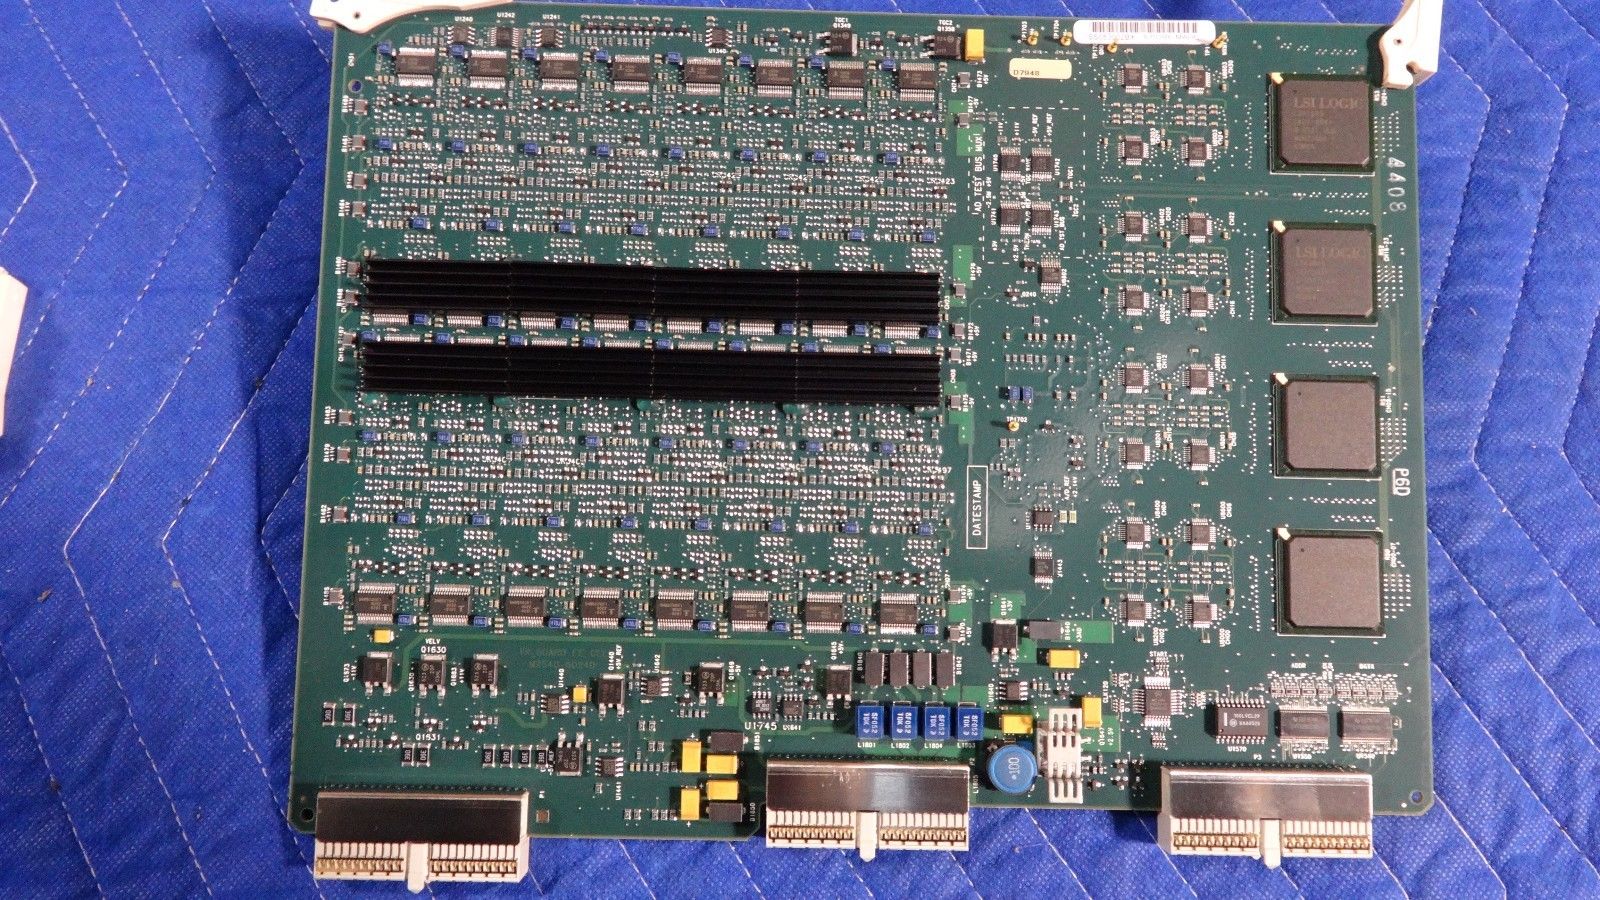 a close up of a computer motherboard on a blue surface